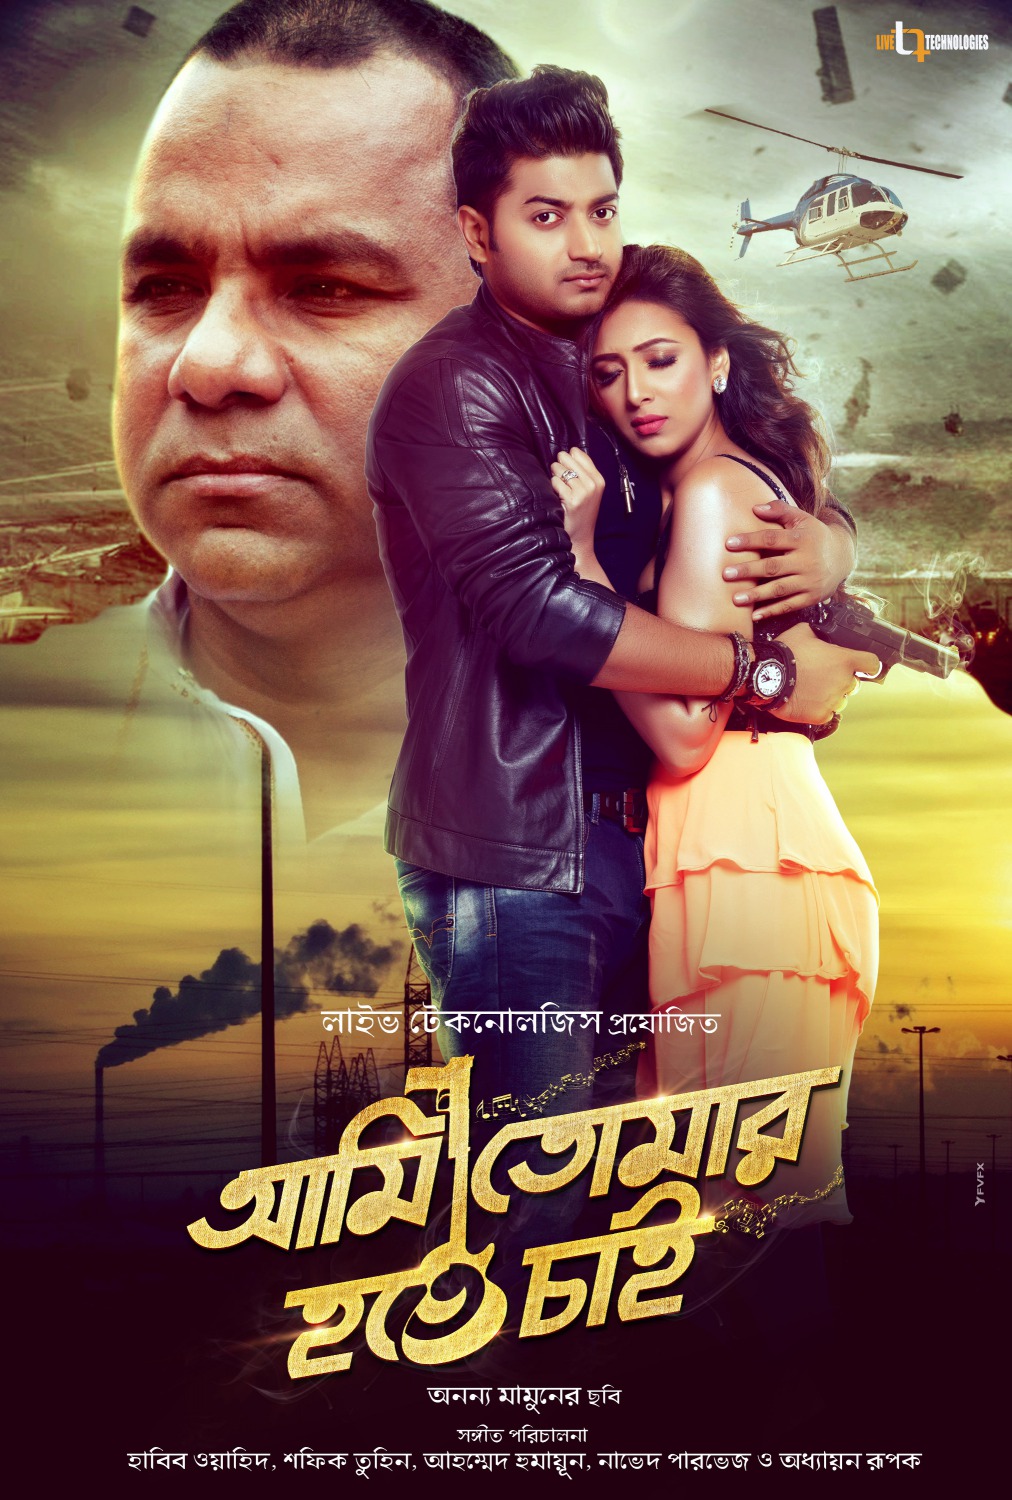 Extra Large Movie Poster Image for Ami Tomar Hote Chai (#9 of 11)